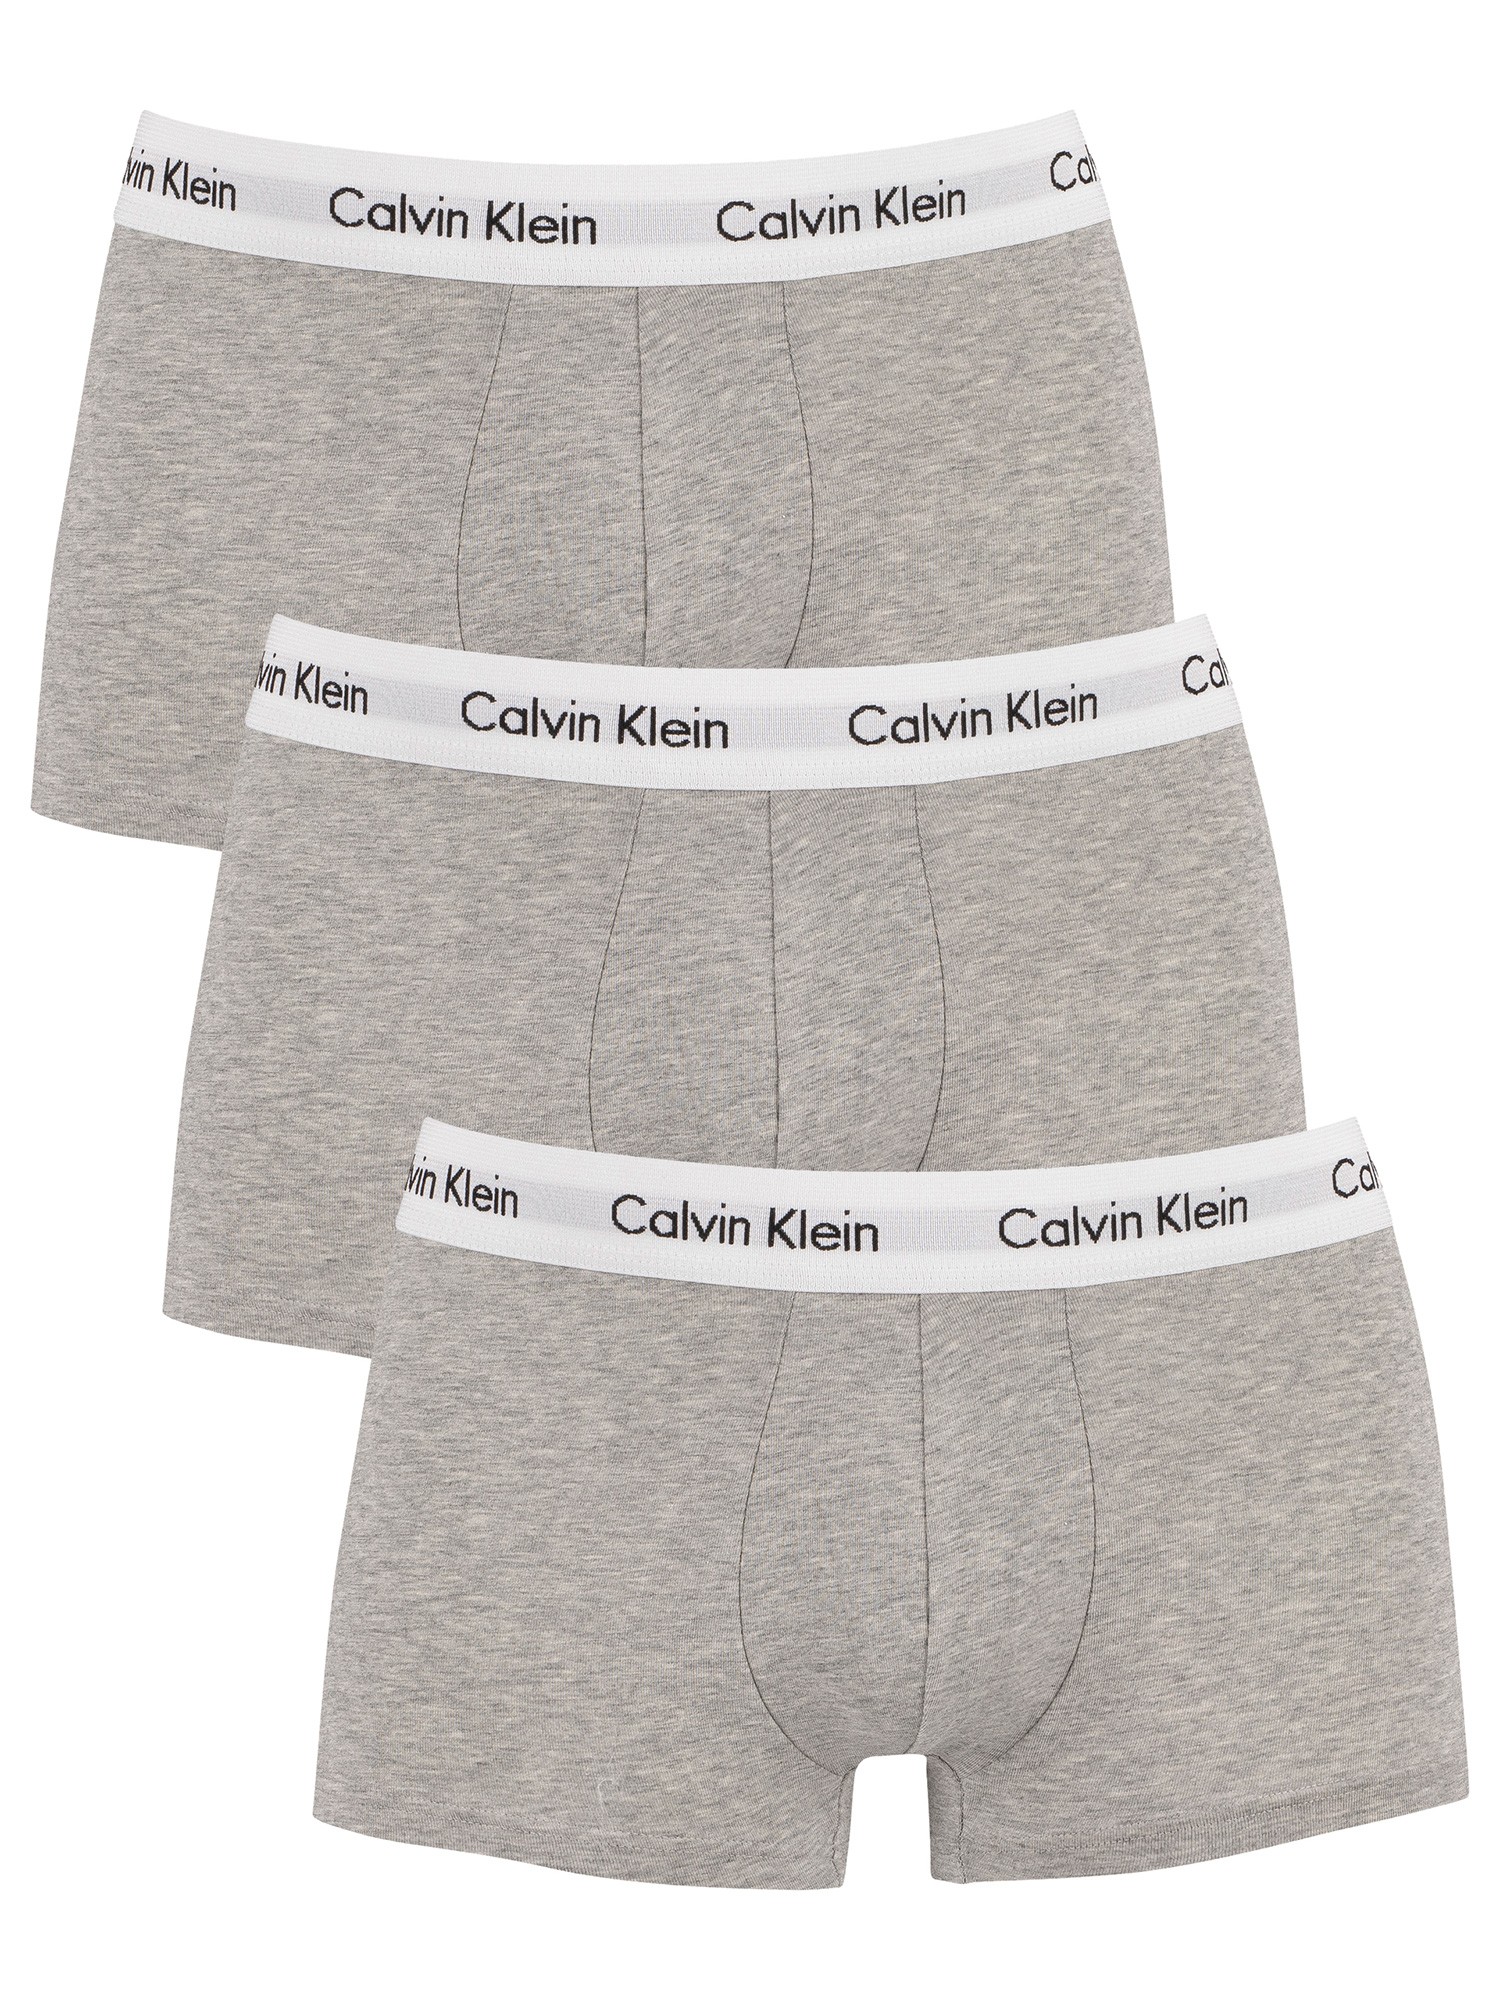 Calvin Klein 3 Pack Low Rise Trunks - Grey Heather | Standout